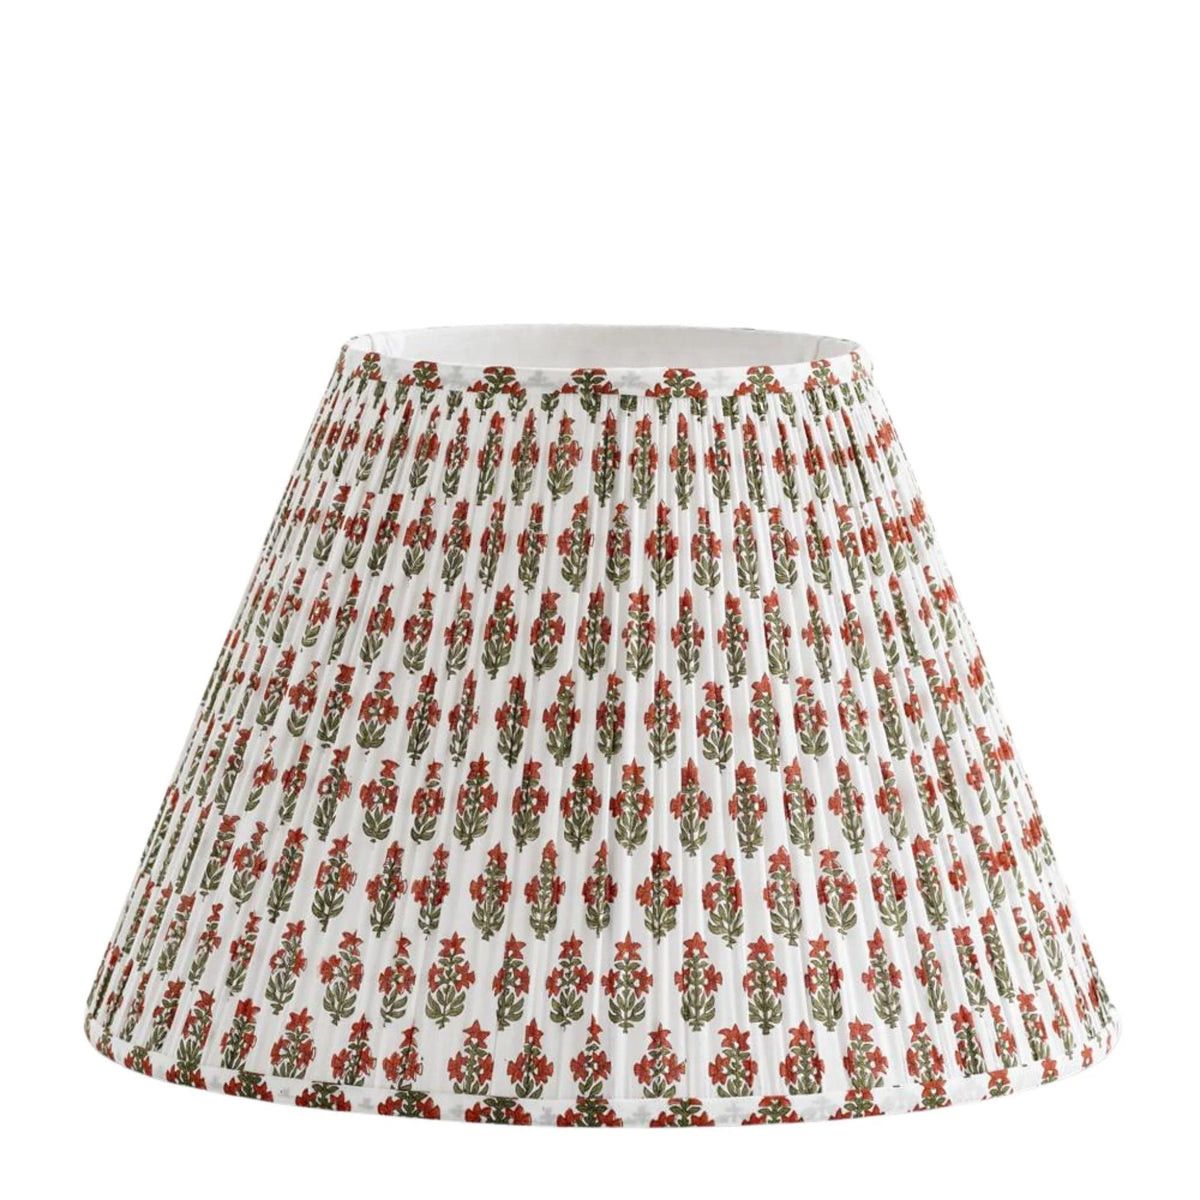 Prickly Poppycape Patterned Fabric Lampshade | The Well Appointed House, LLC